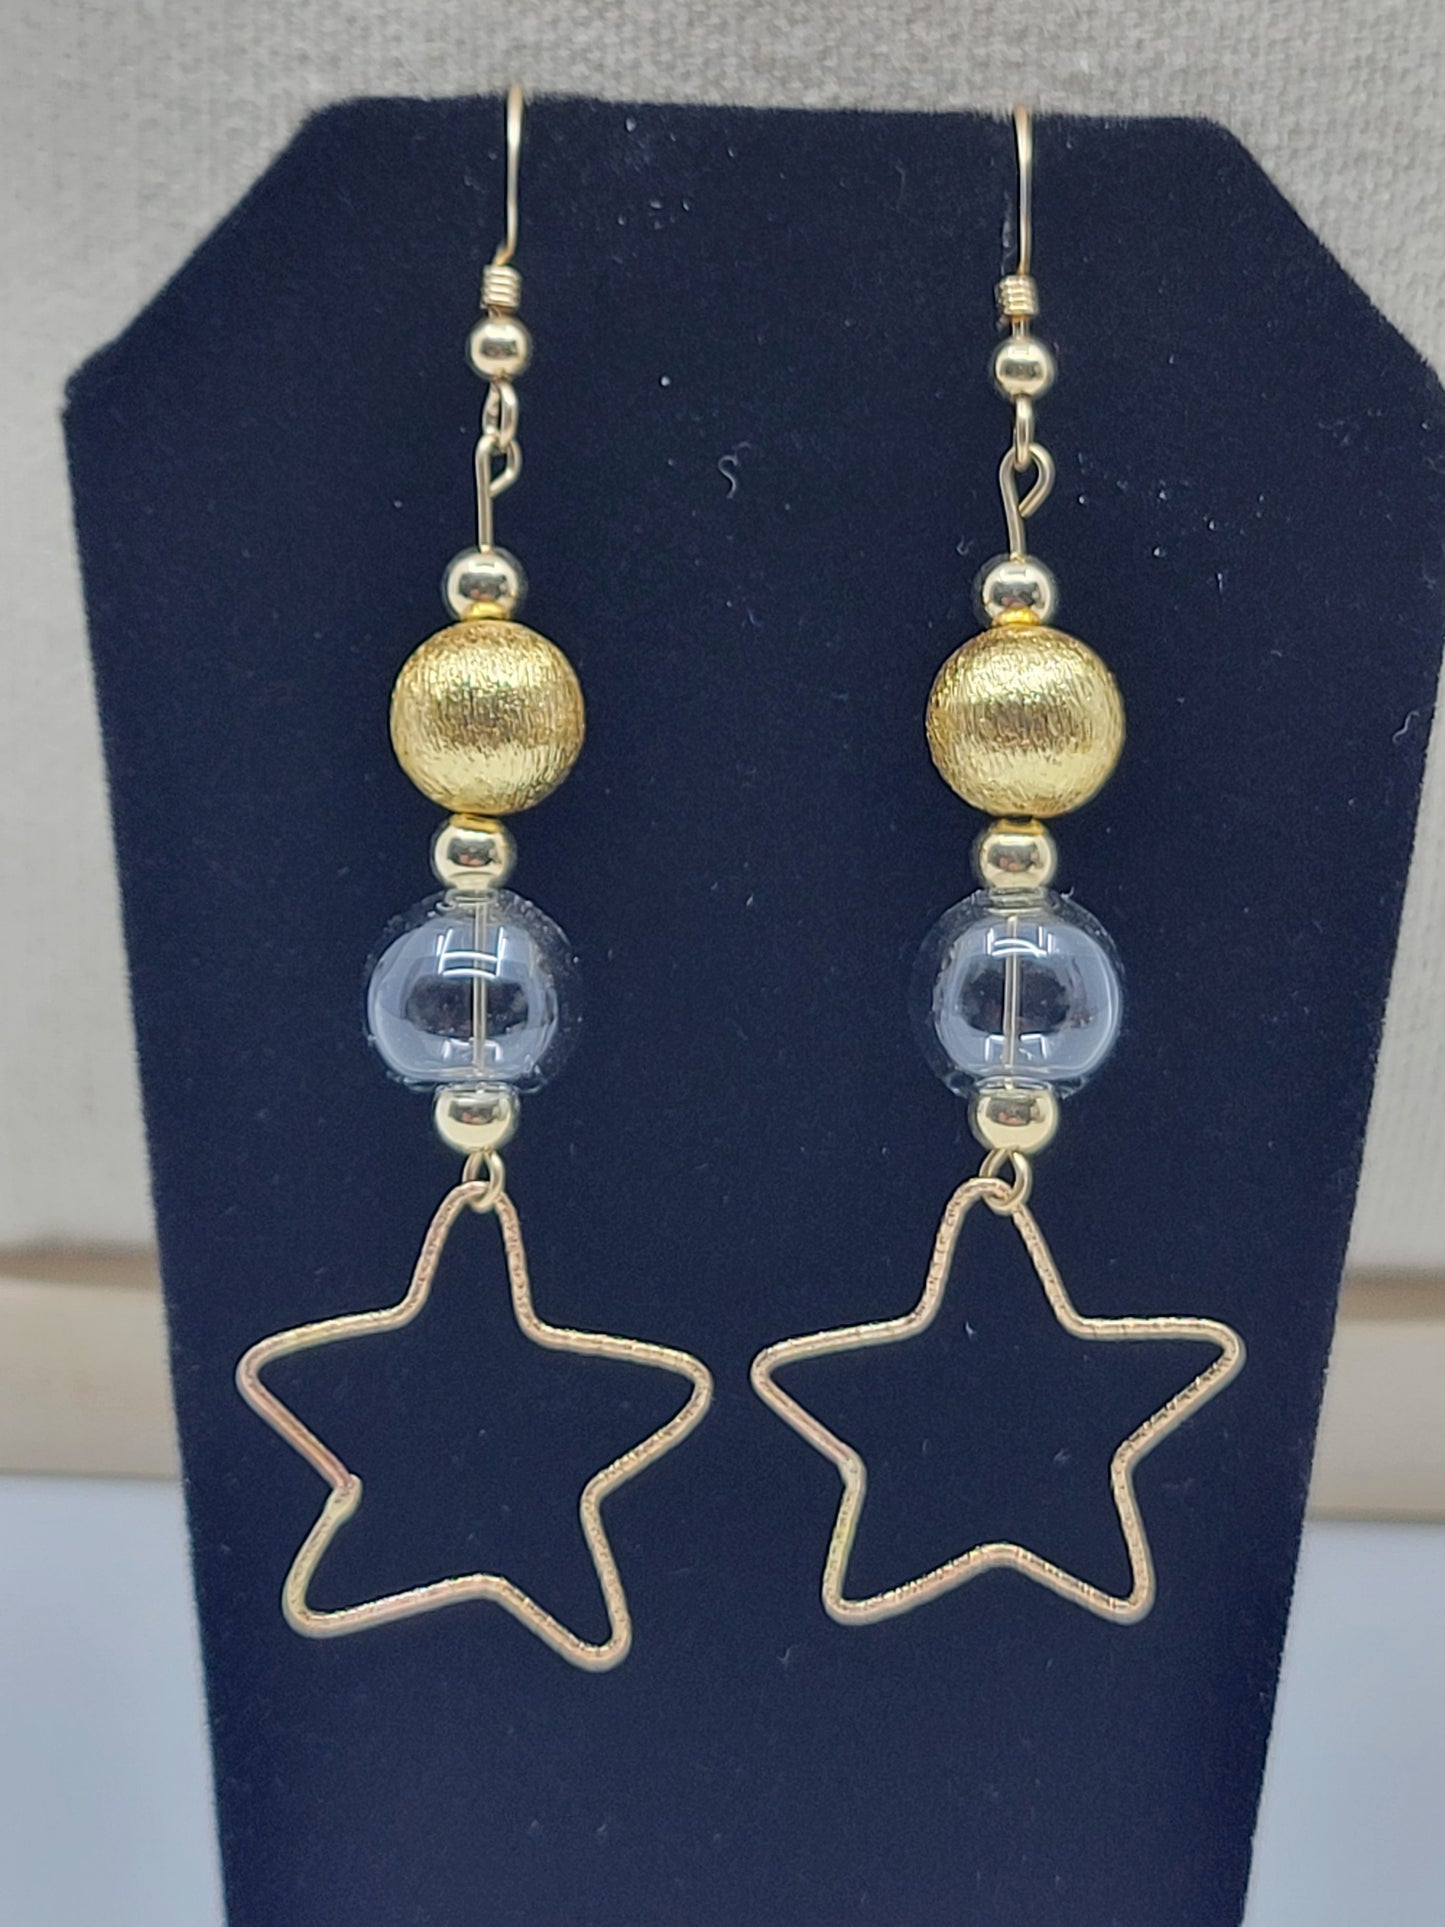 Hollow Glass Beads with Gold Filled Accents & Stars